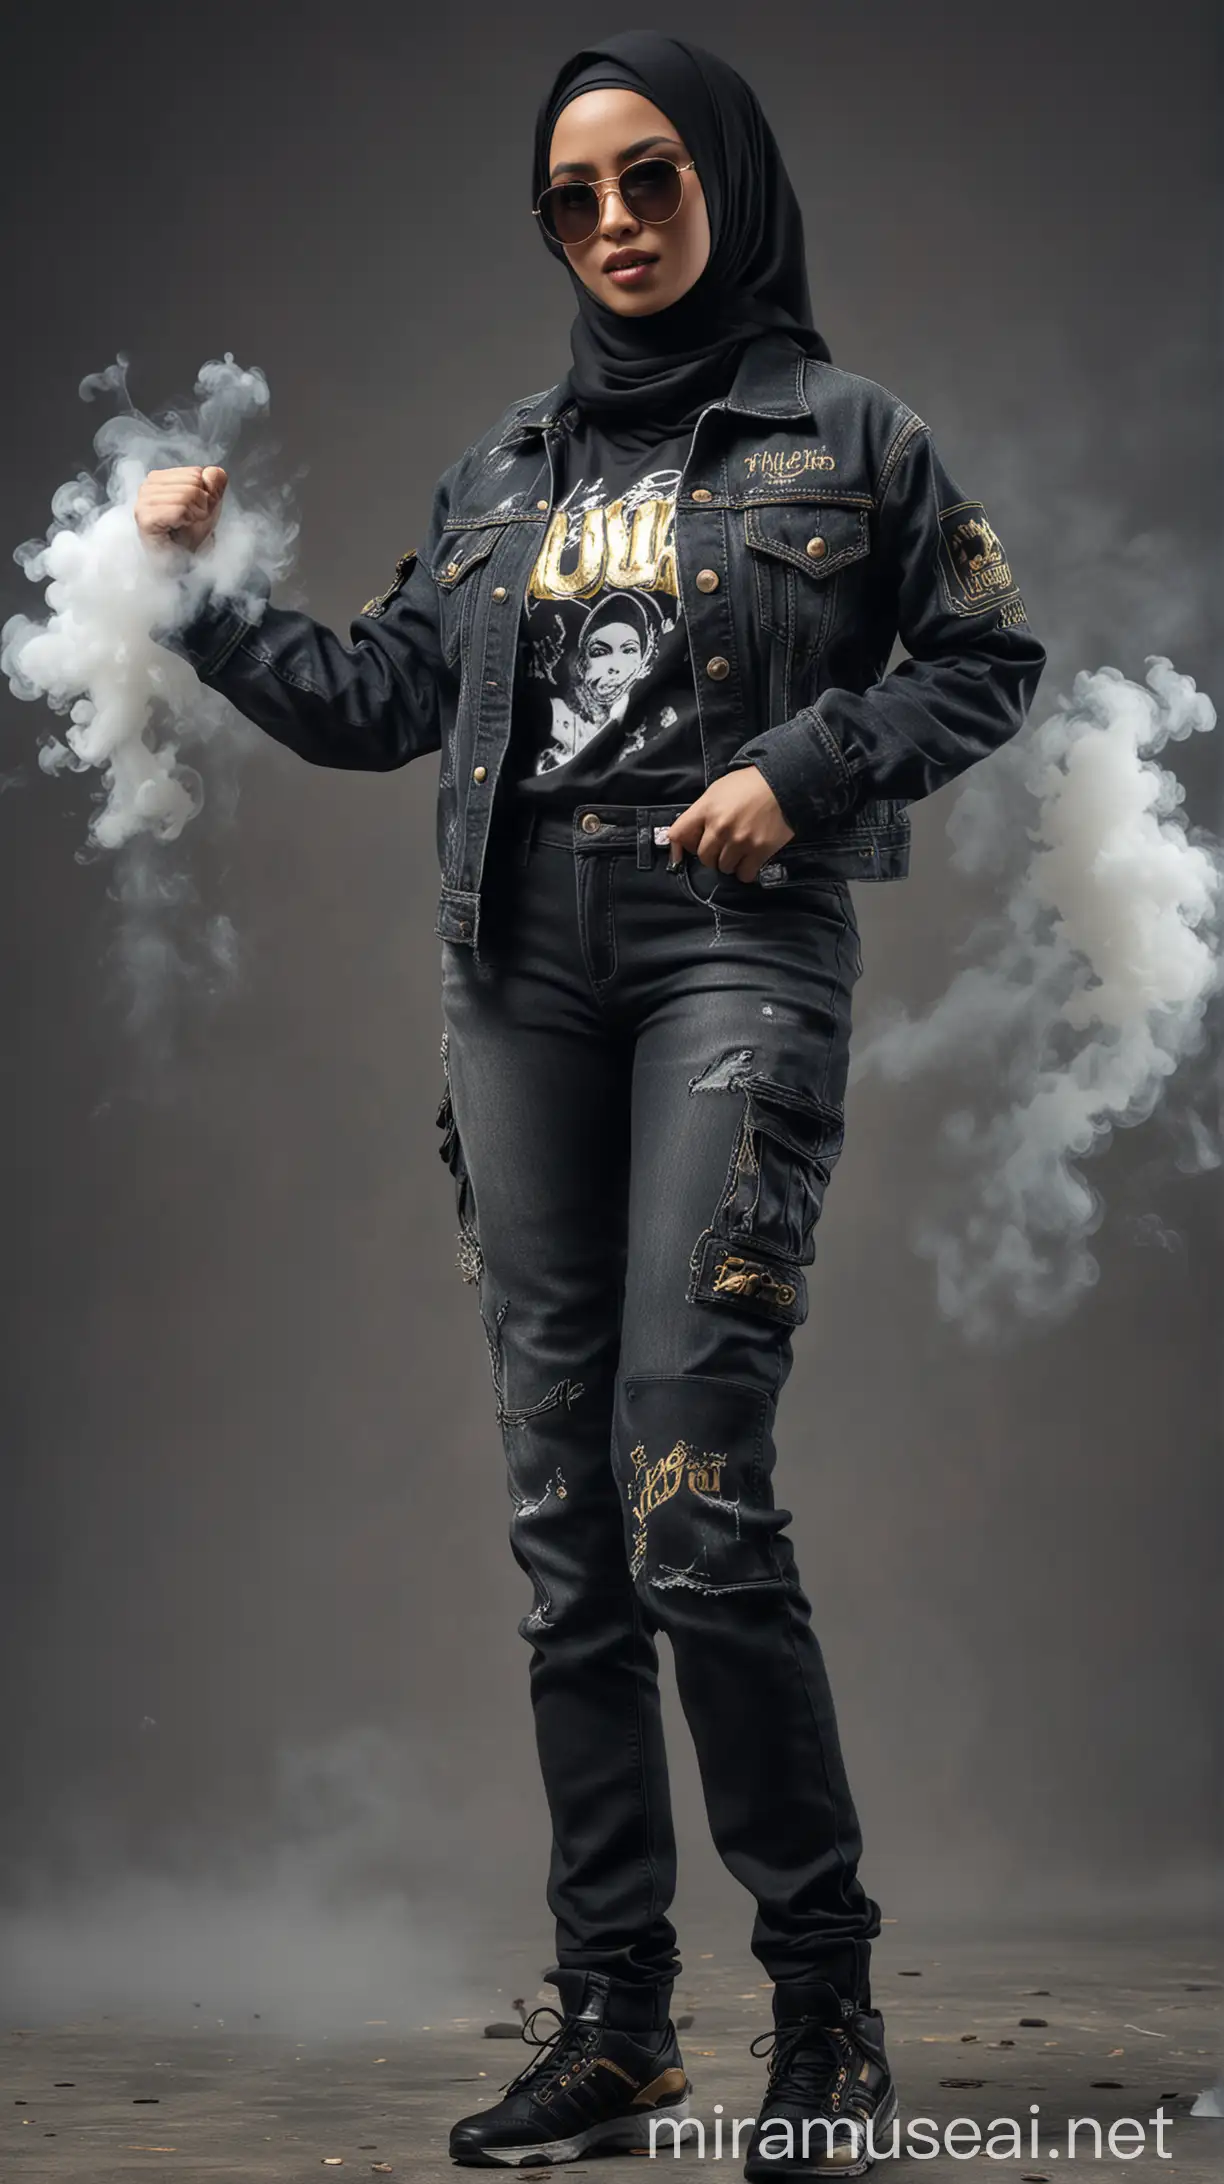 ULTRA REALISTIC high definition, beautiful Indonesian woman wearing a black hijab, wearing a jeans jacket that says "AYU" posing with clenched fists, facing the camera, wearing sunglasses, wearing black tactical pants, wearing tactical shoes, in thick white smoke with gold highlights